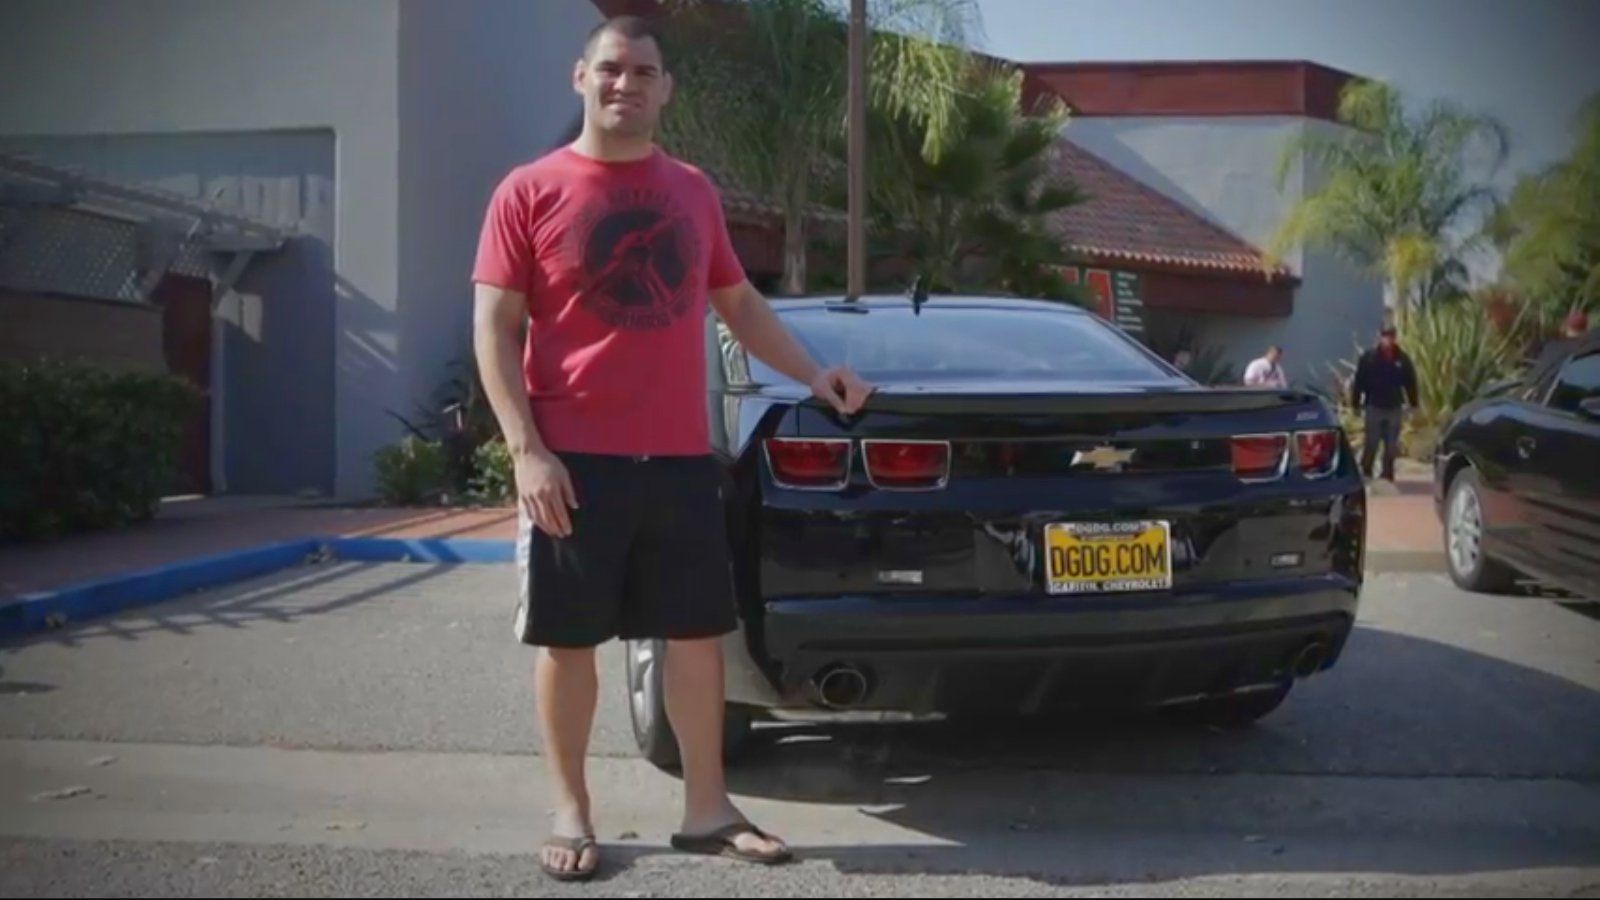 Perks of Being the Champ MMA Fighter Cain Velasquez Given Camaro